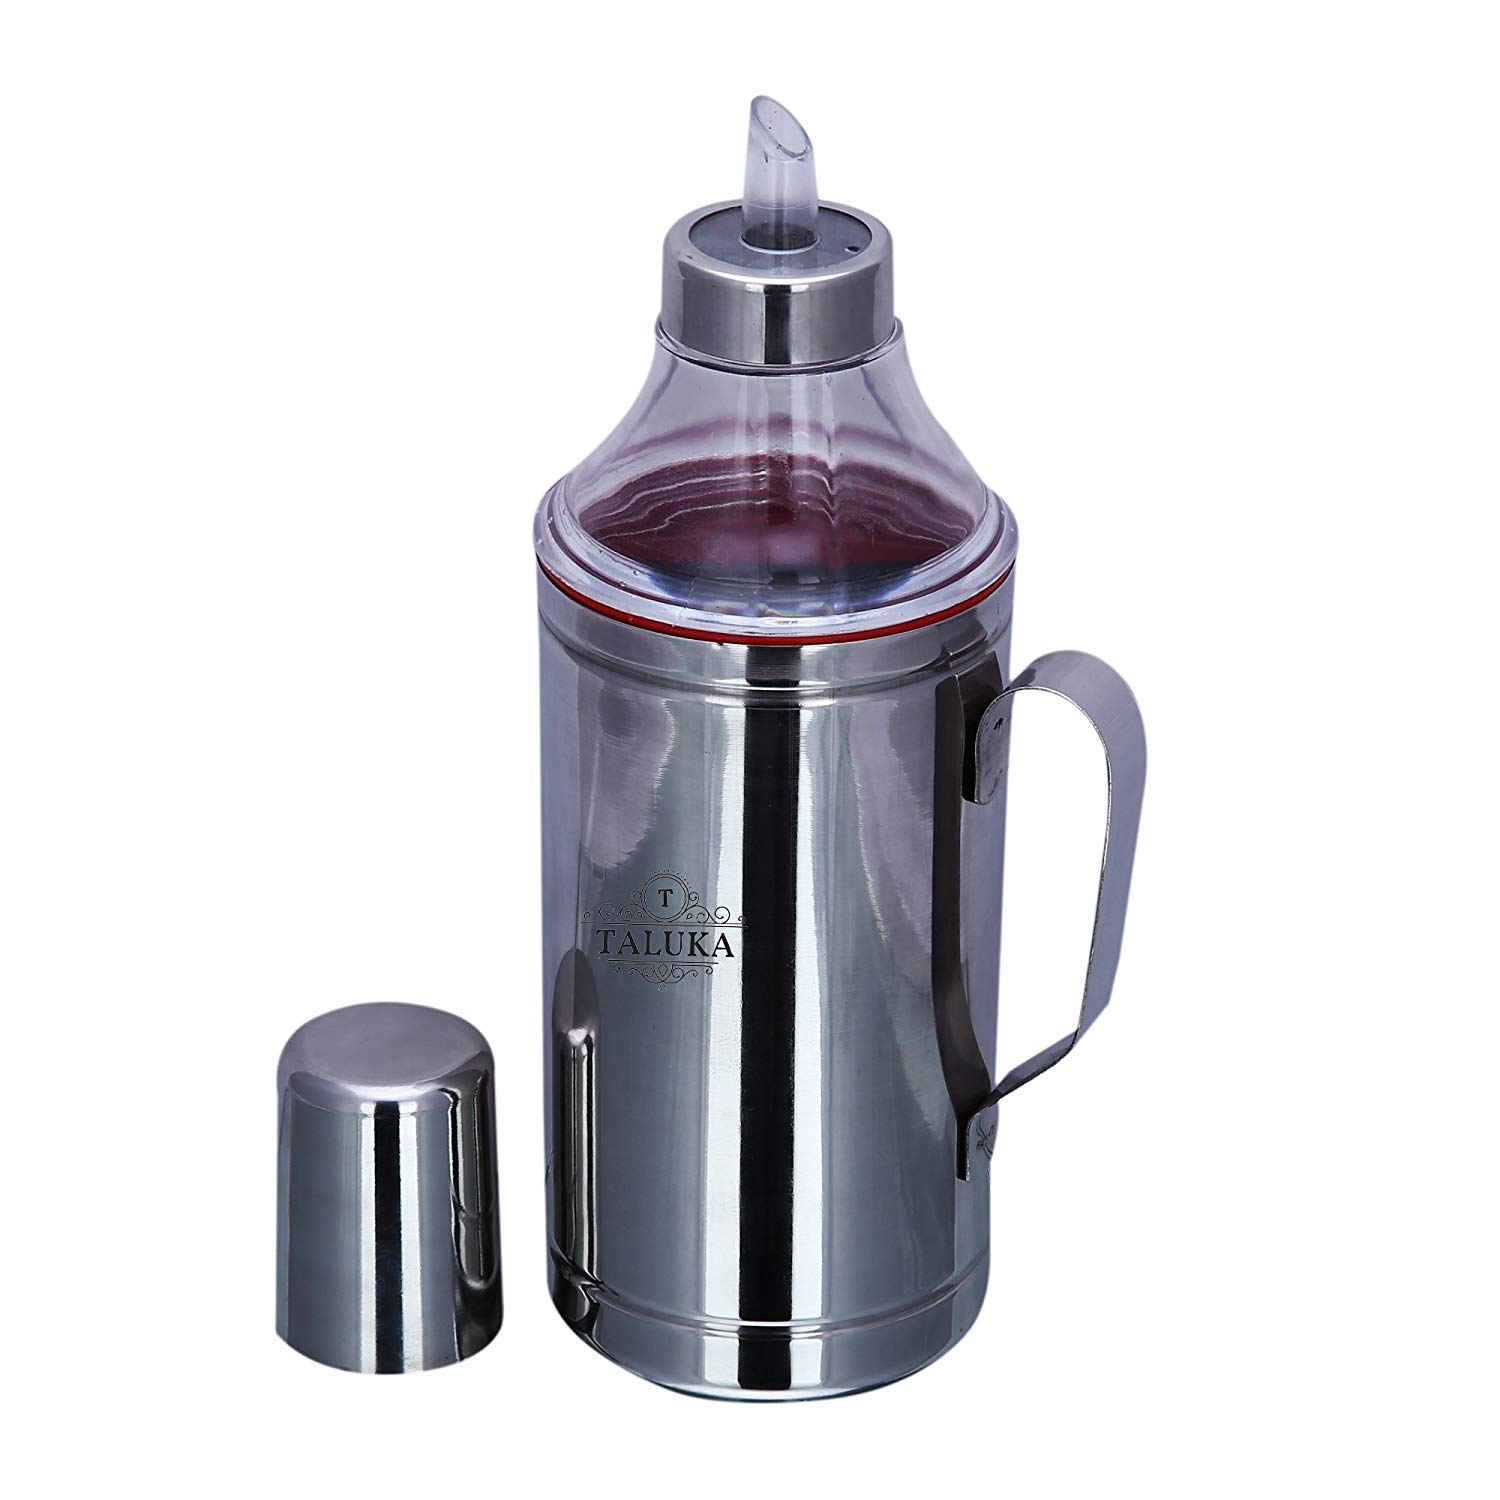 Stainless Steel Milk Can/Oil Can, Storage Ware For Home Restaurant Hotel Use